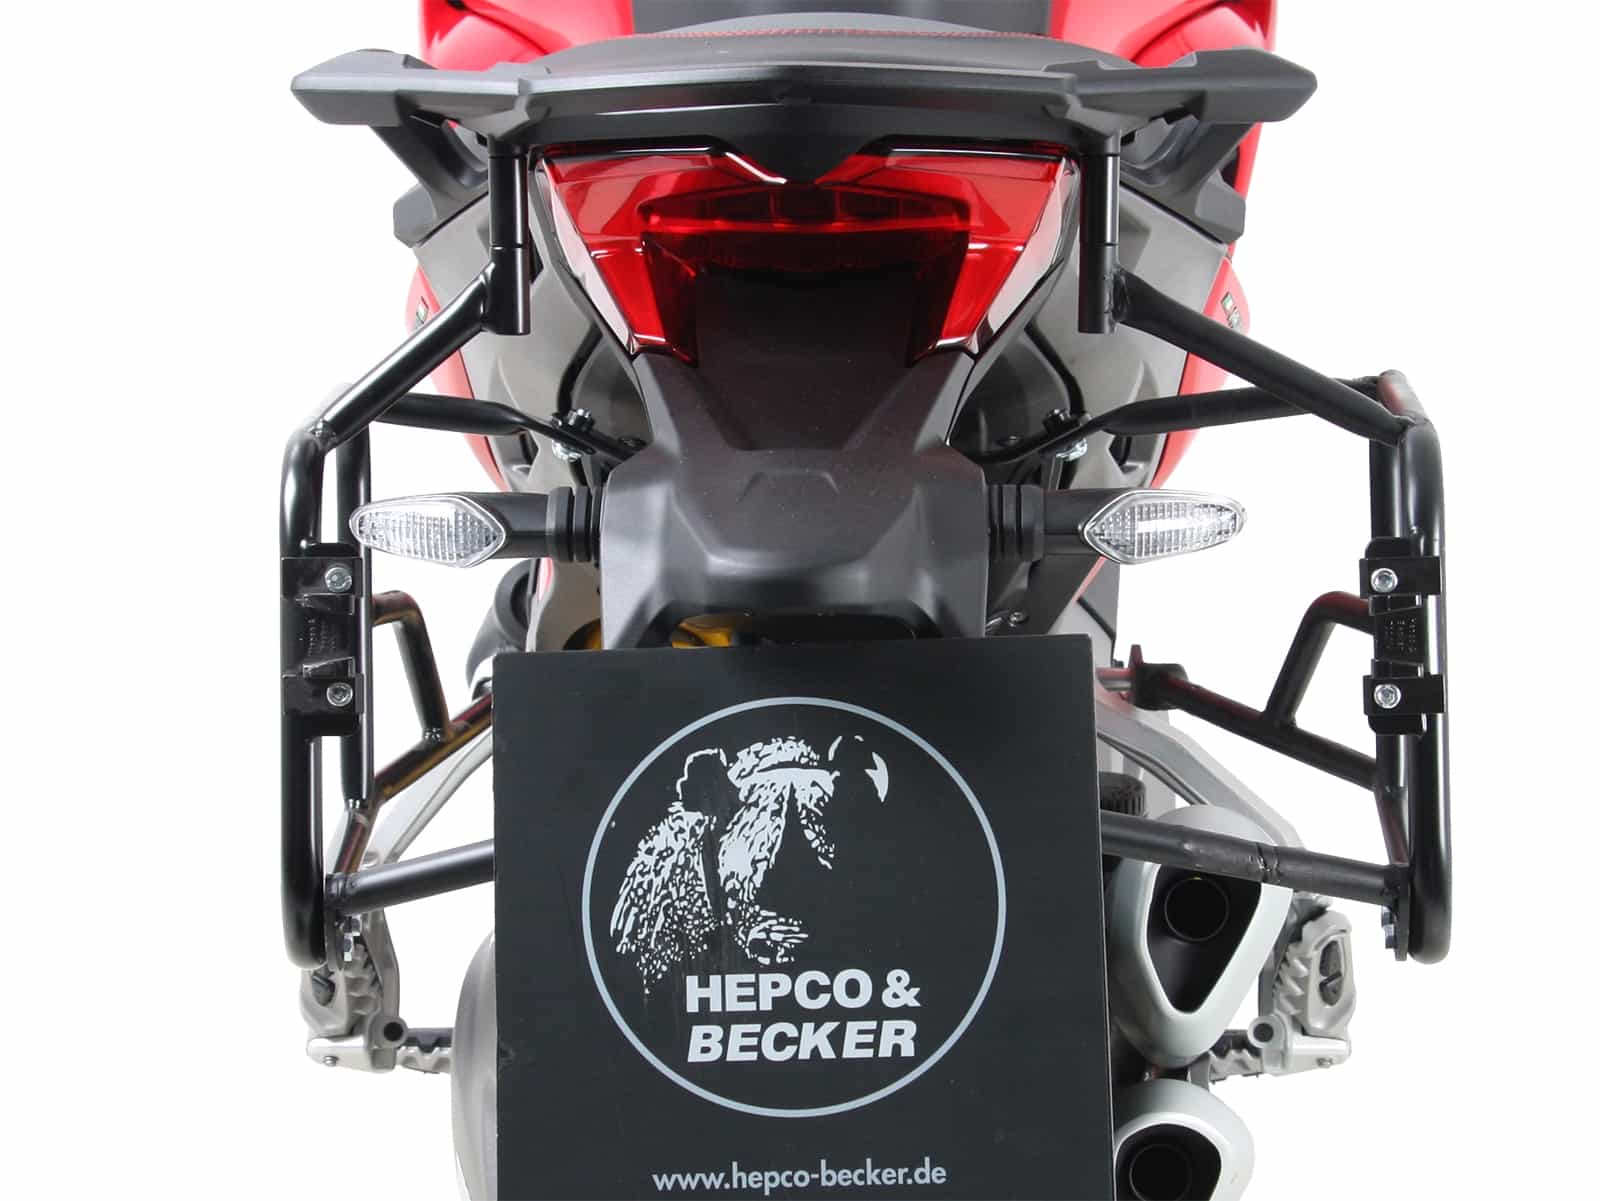 Sidecarrier permanent mounted black for Ducati Multistrada 1260 / S (2018-)